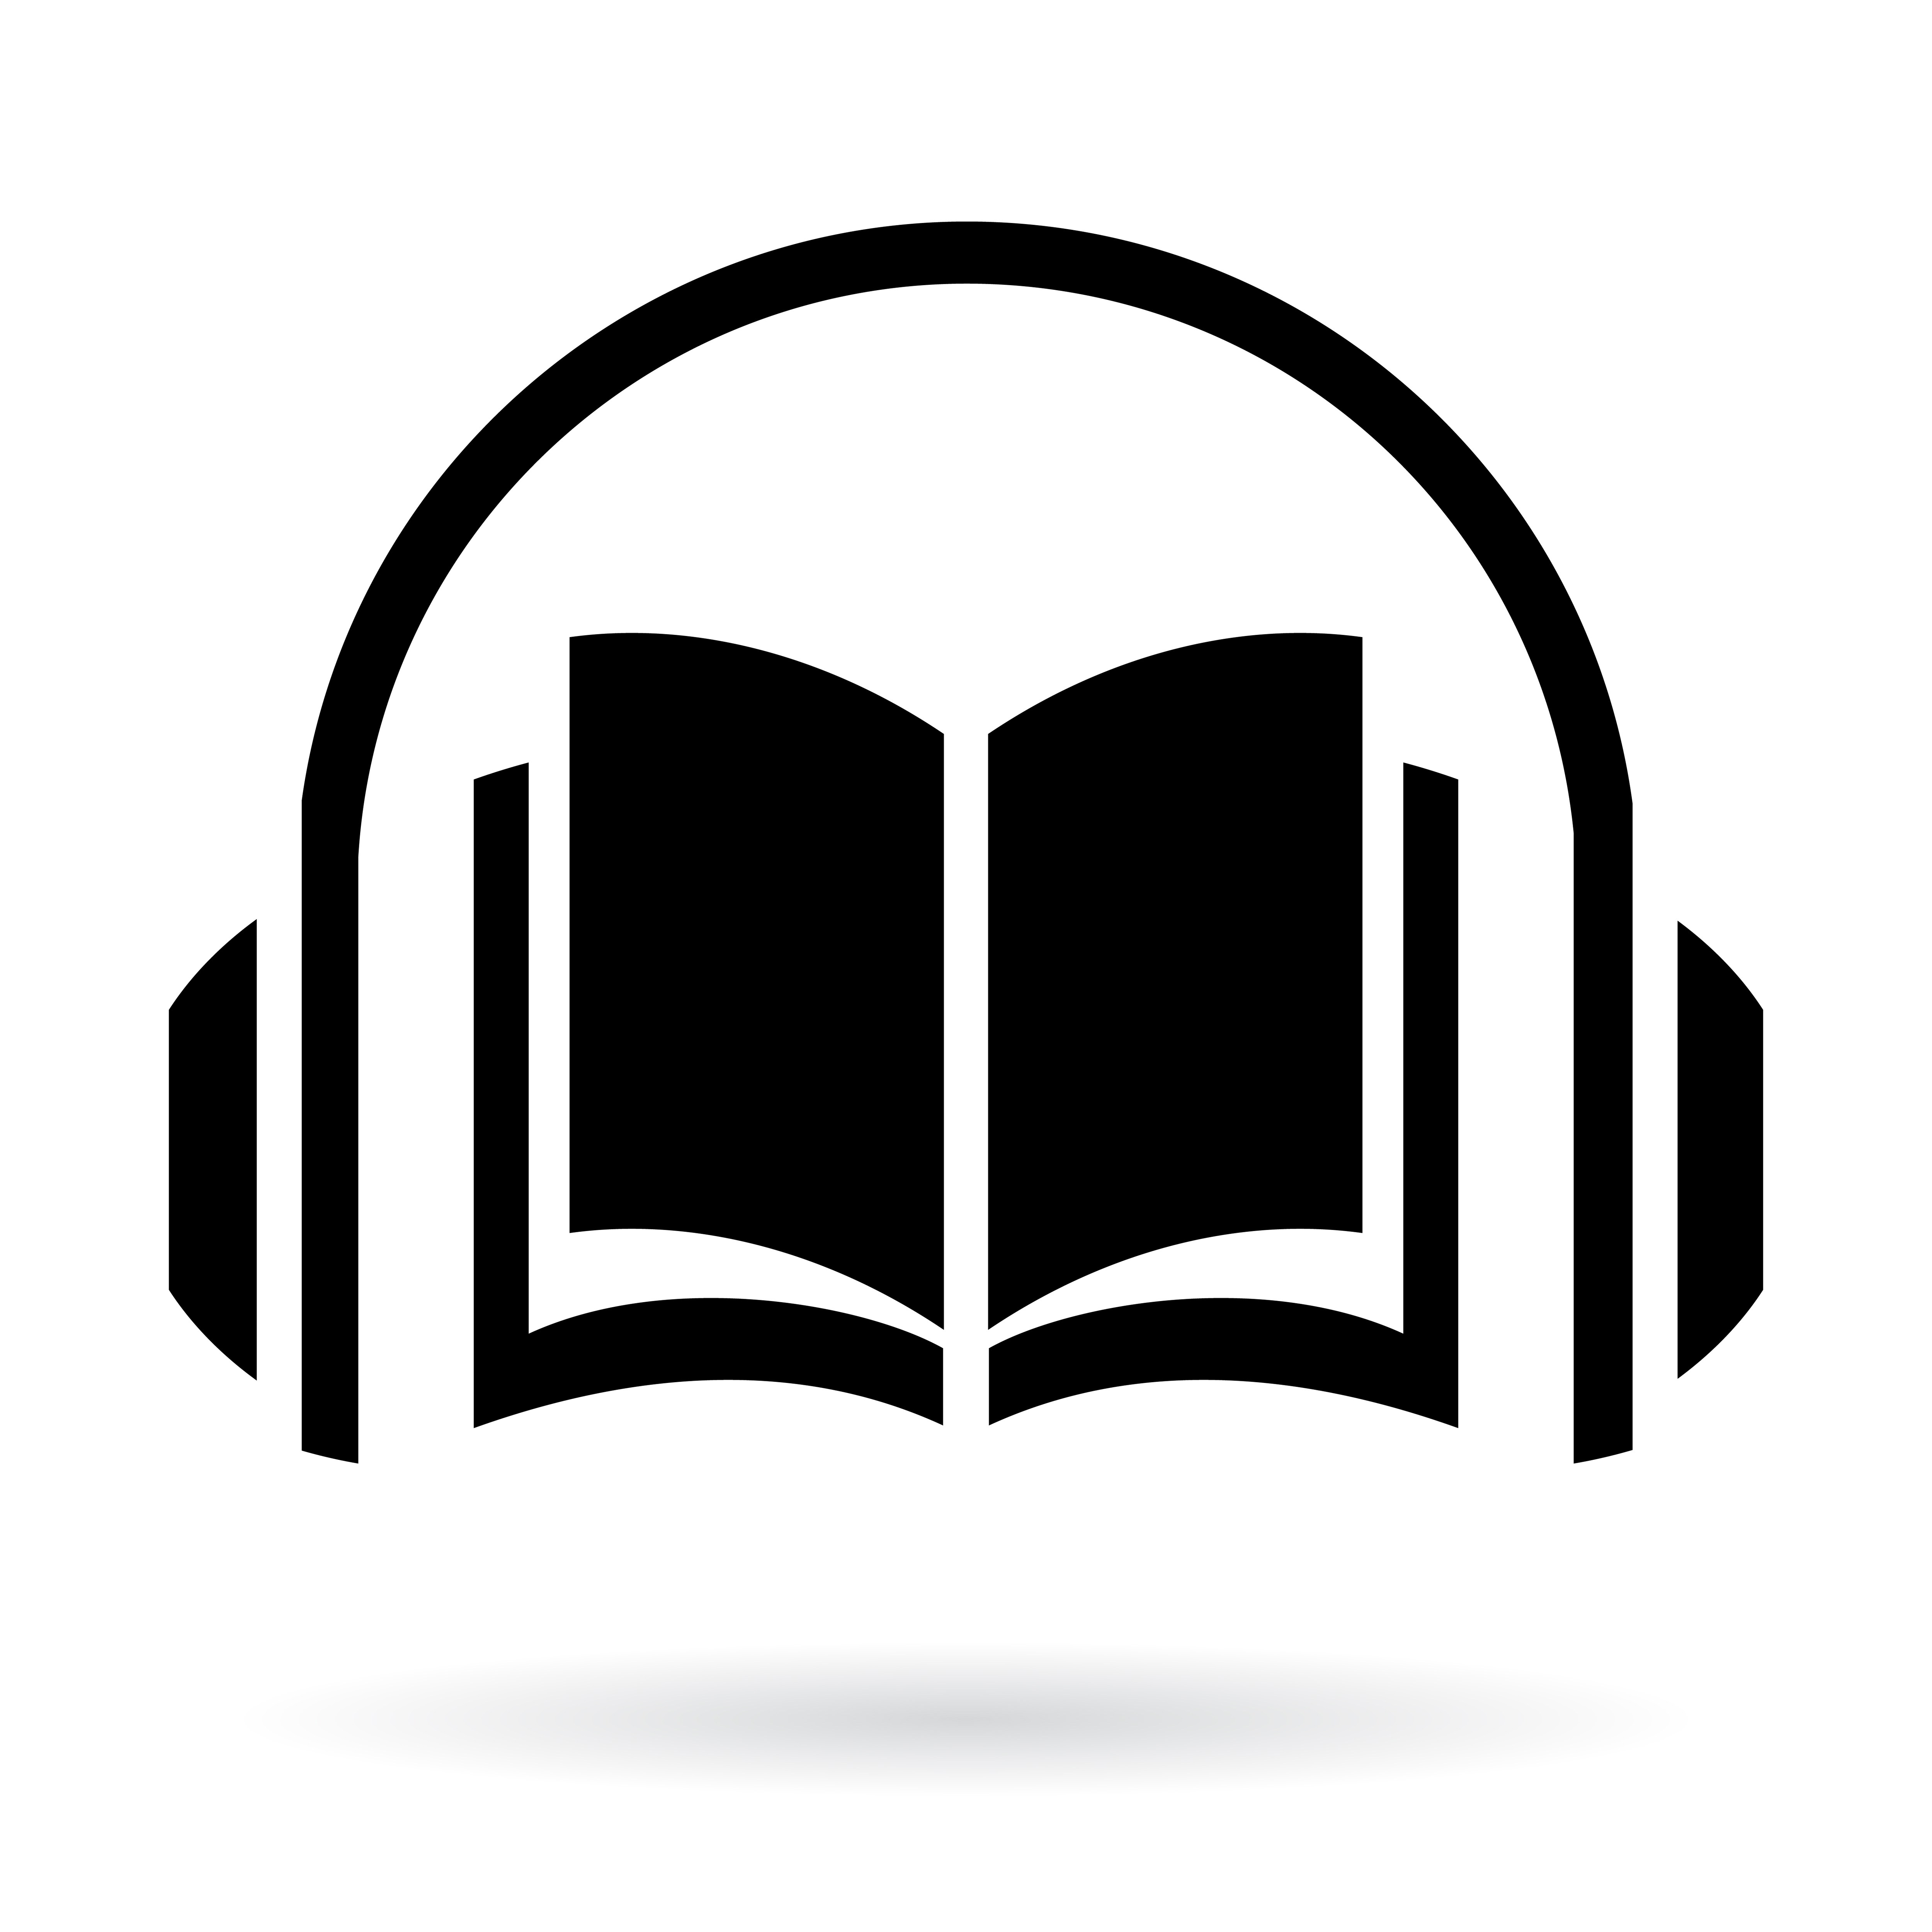 audiobook logos and icons - Google Search | logos audiobook 